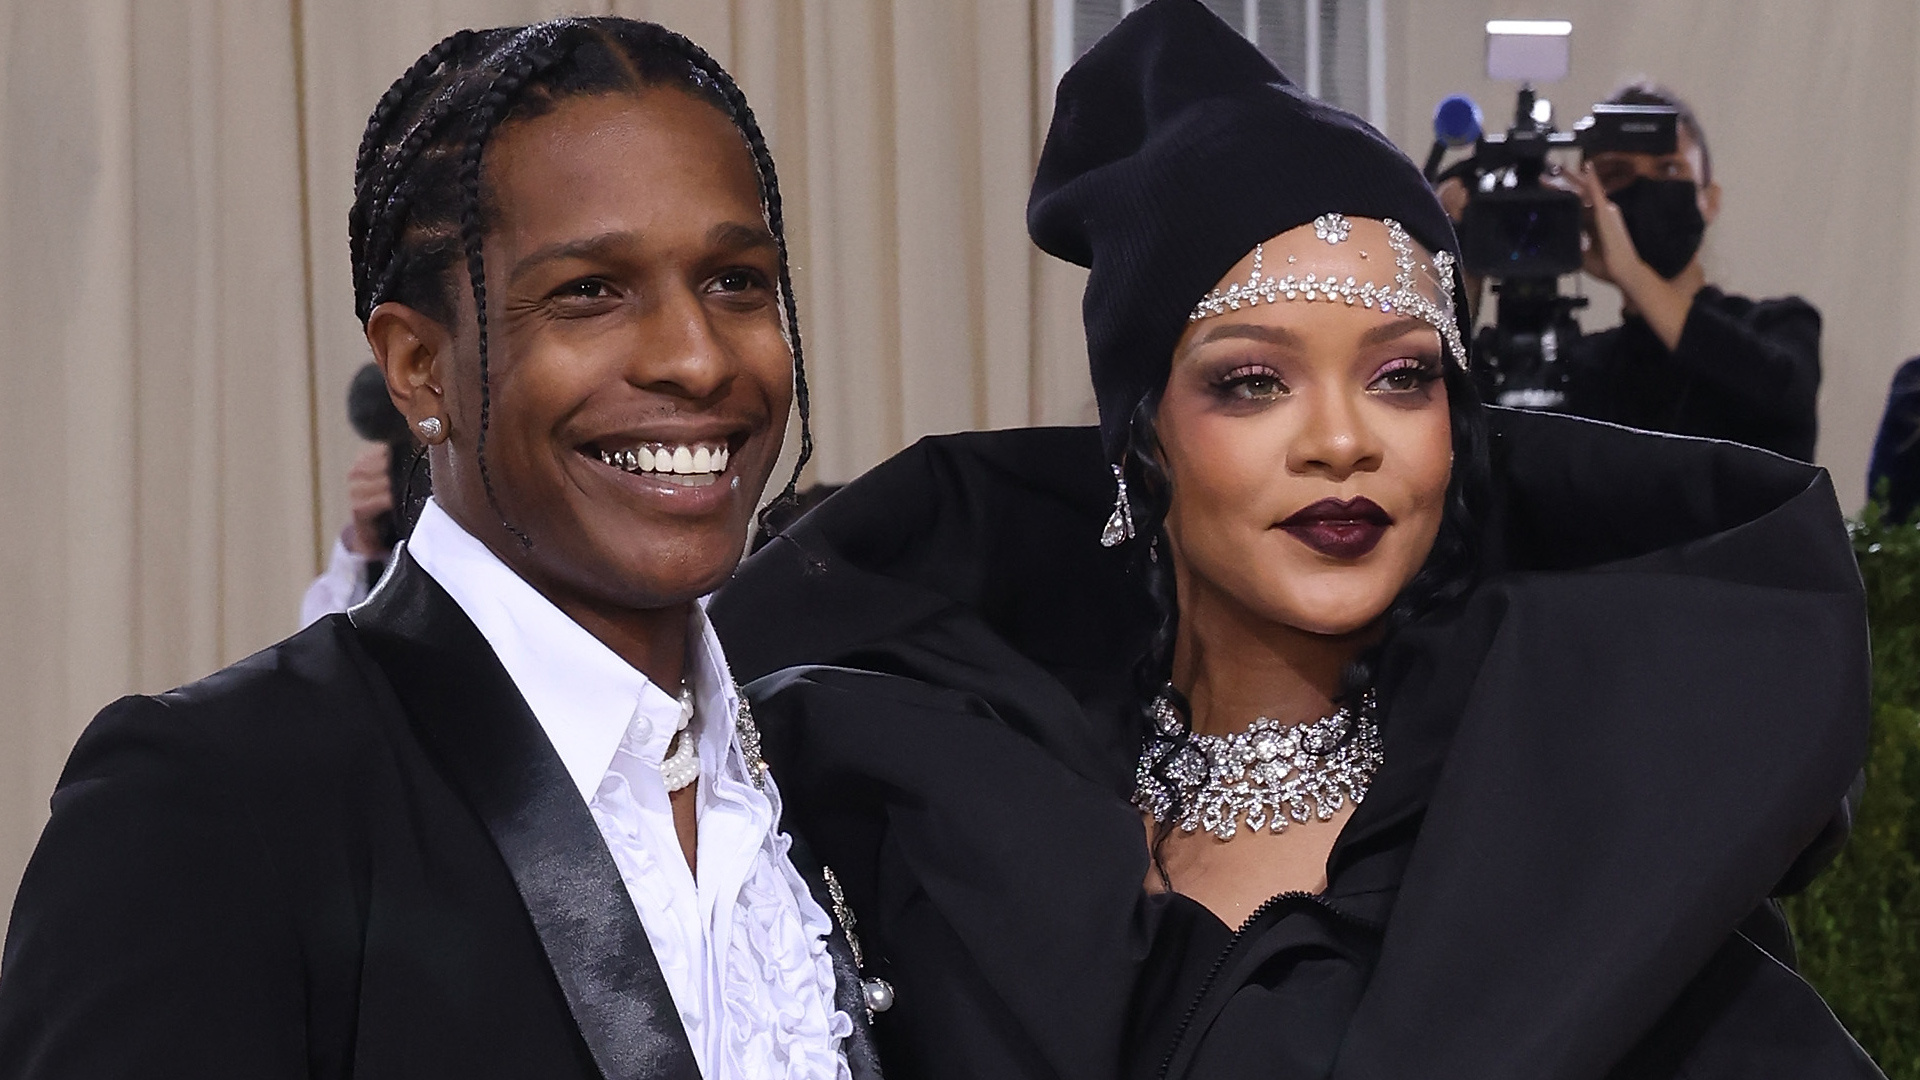 Rihanna and ASAP Rocky: Barbadian singer and her boyfriend, announced her pregnancy in a photoshoot in Harlem, New York City, 2022. 1920x1080 Full HD Wallpaper.